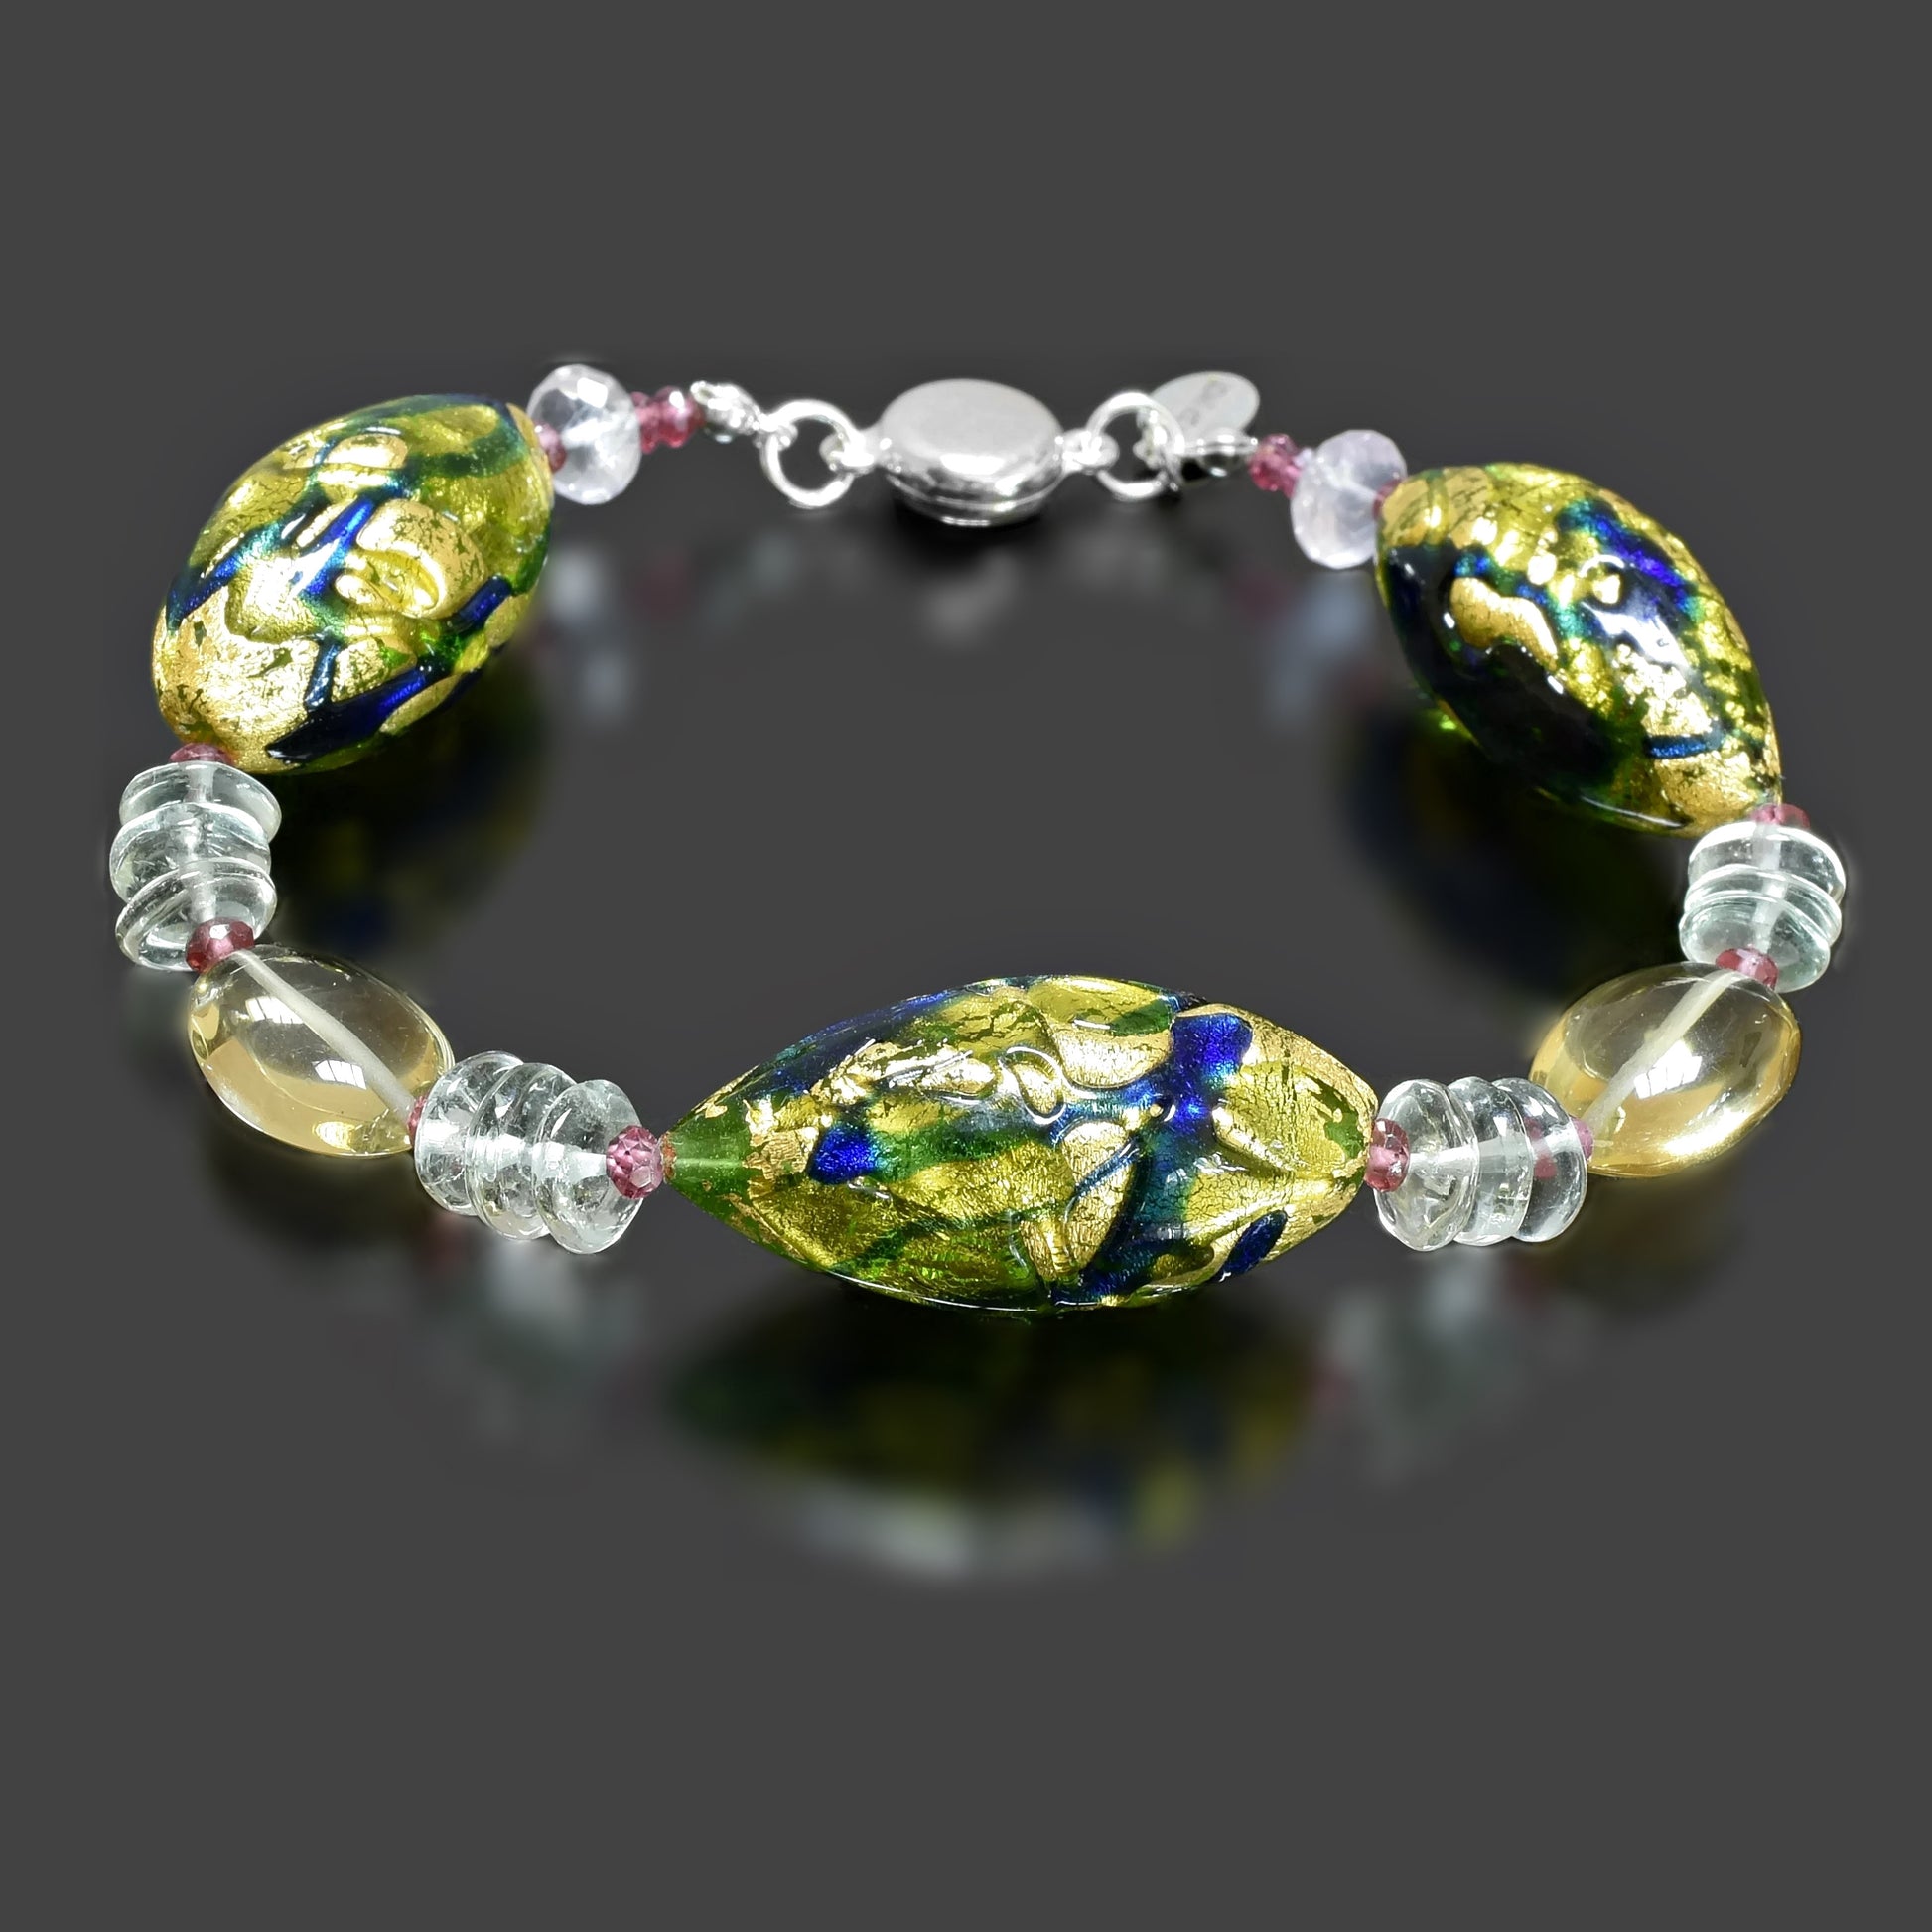 Green Large Murano Bead Statement Bracelet with Green Amethyst &Champagne Quartz Sterling Silver 6"